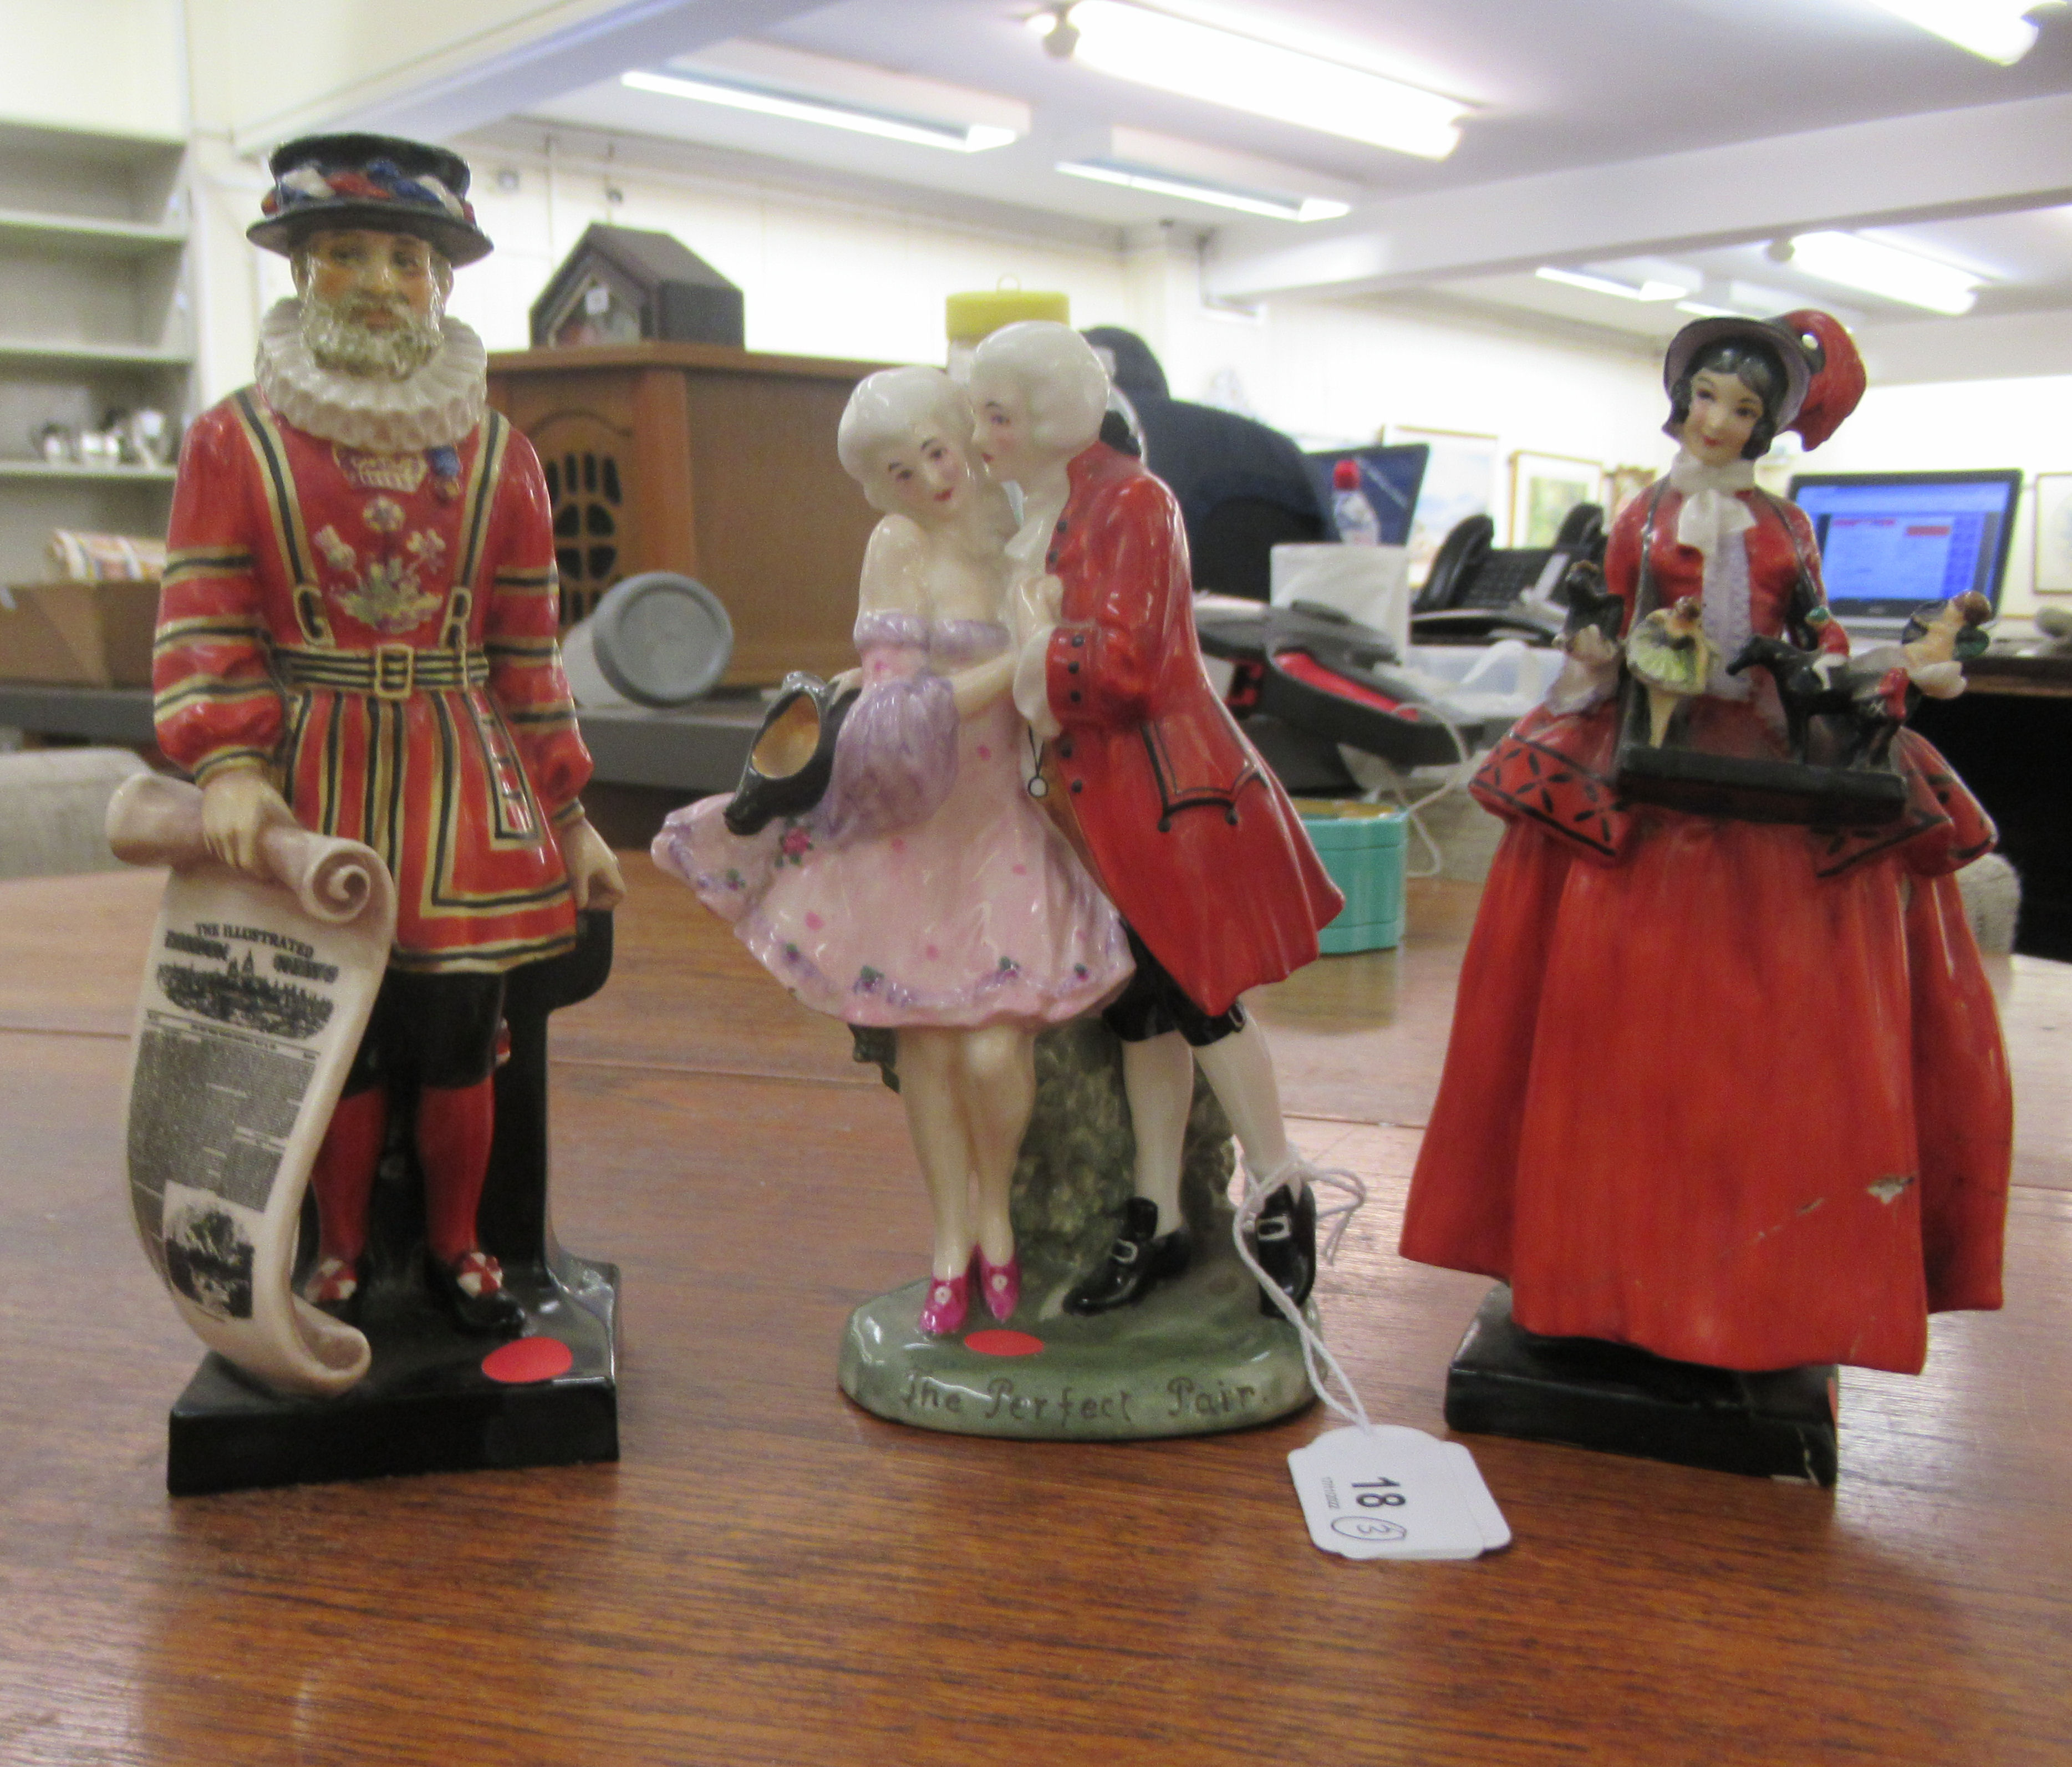 Three Royal Doulton china figures, 'Beefeater'  7.5"h; 'The Perfect Pair'  7"h; and a young woman